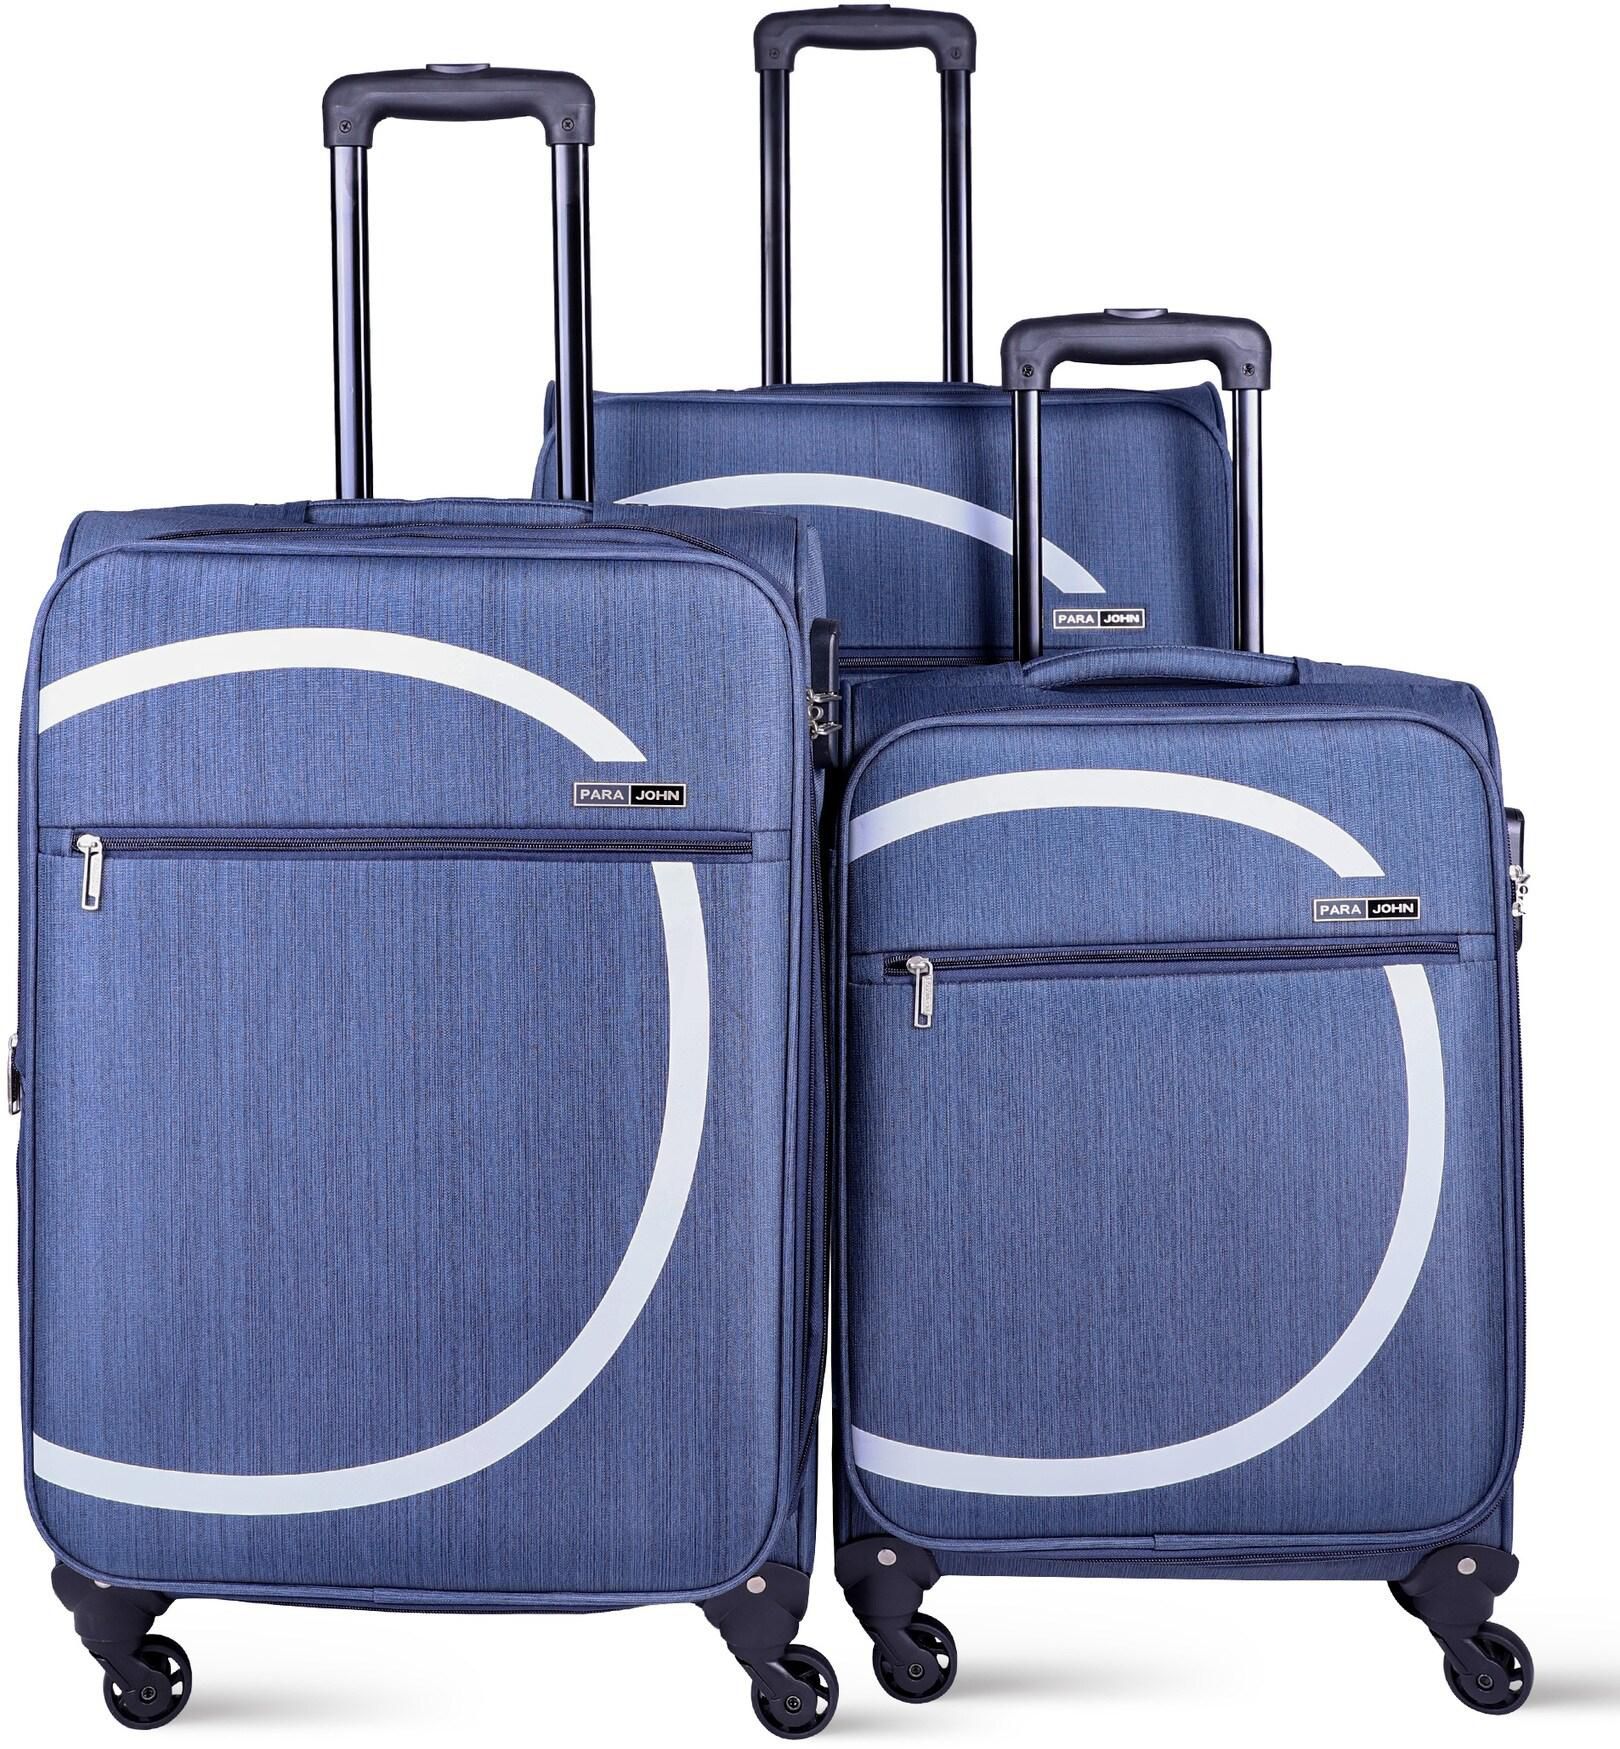 Para John Travel Luggage Suitcase, Set Of 3 - Trolley Bag, Carry On Hand Cabin Luggage Bag - Lightweight Travel Bags With 360 Durable 4 Spinner Wheels - Soft Shell Luggage Spinner